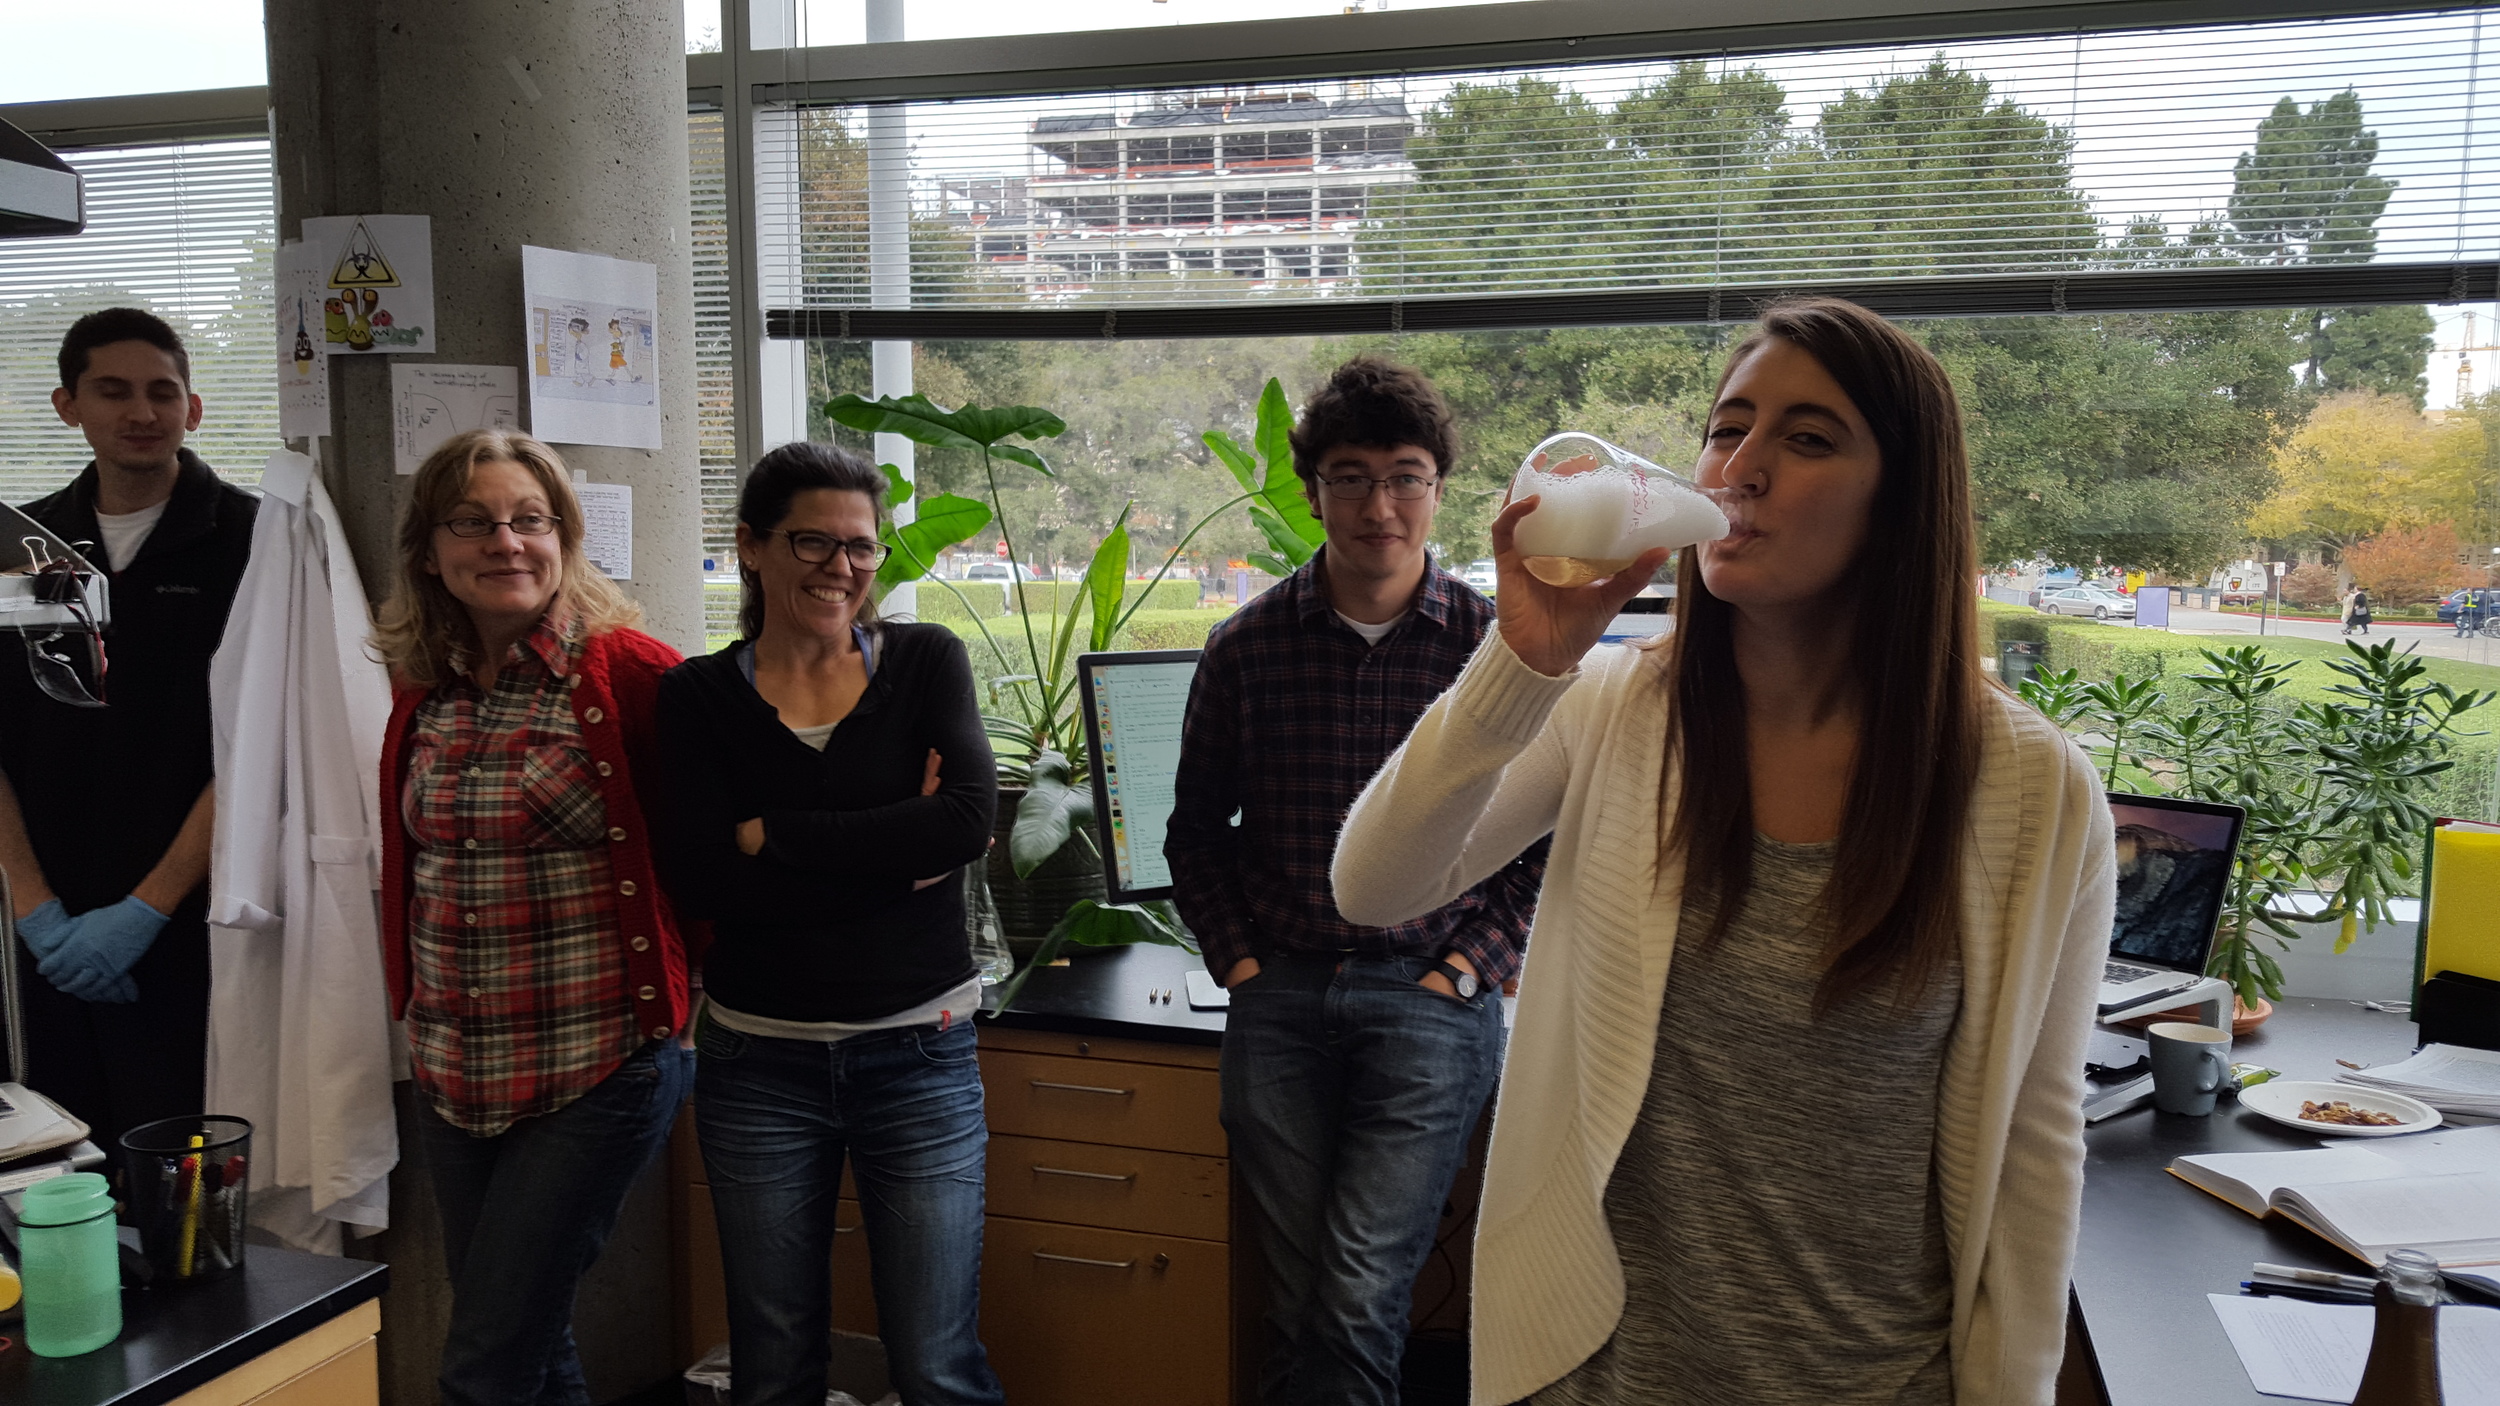 Fiona passes her quals - and drinks from the lab trophy!